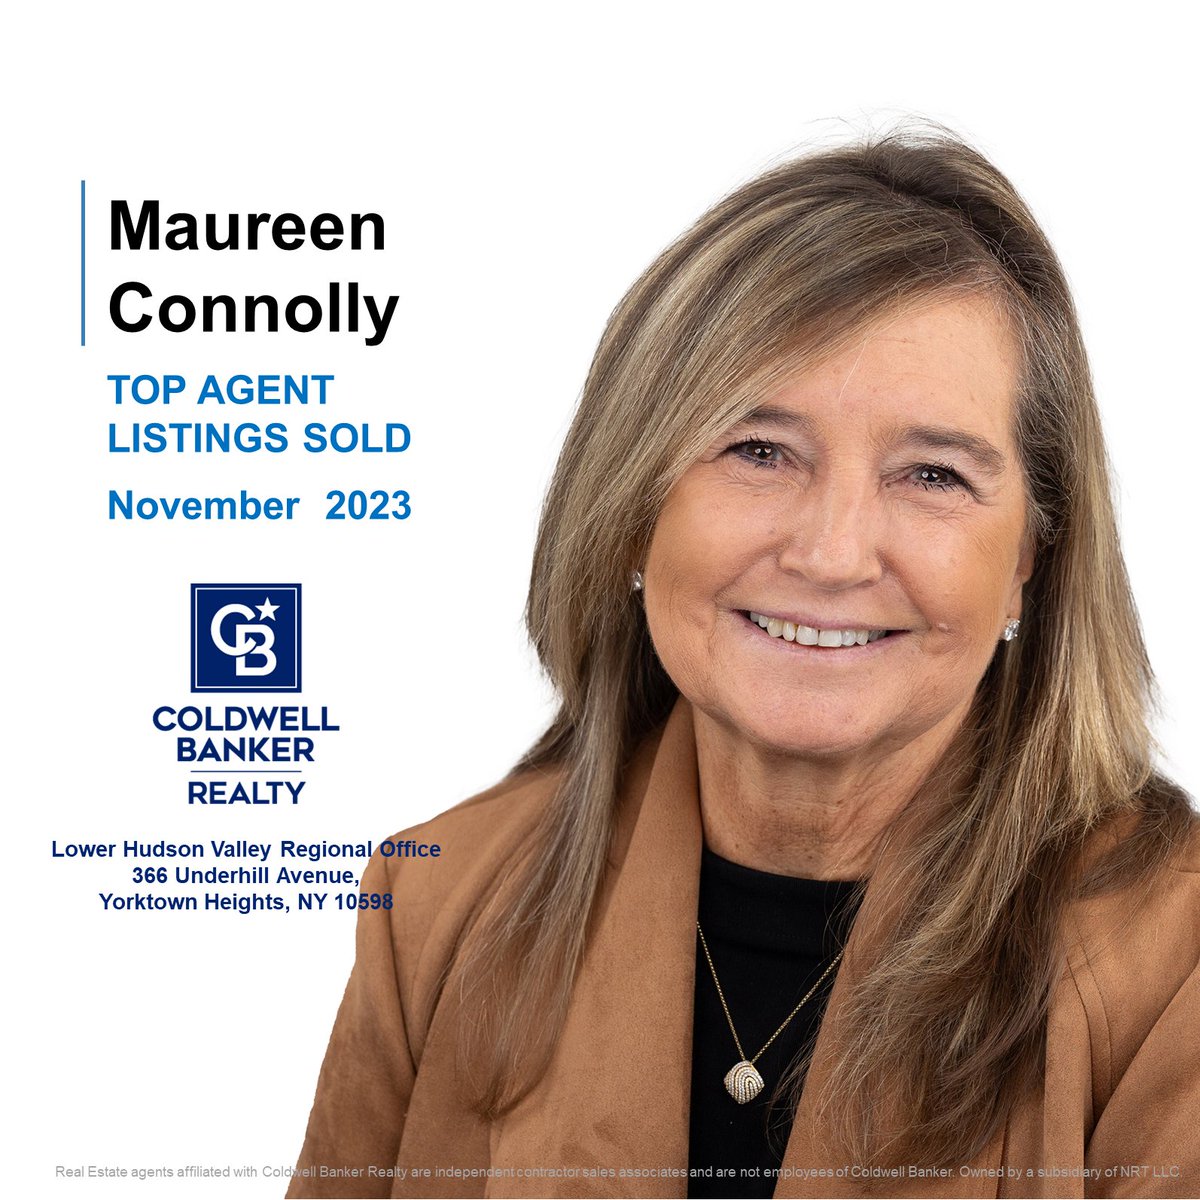 Congratulations to Maureen Connolly on being November’s Top Agent Listings Sold.
Your dedication and hard work is greatly appreciated, Maureen!
#congratulations #cbr #ctwc #realestate #lhvro #cbproud #cbtheplacetobe #bestagent #agentofcoldwellbanker #maureenconnolly